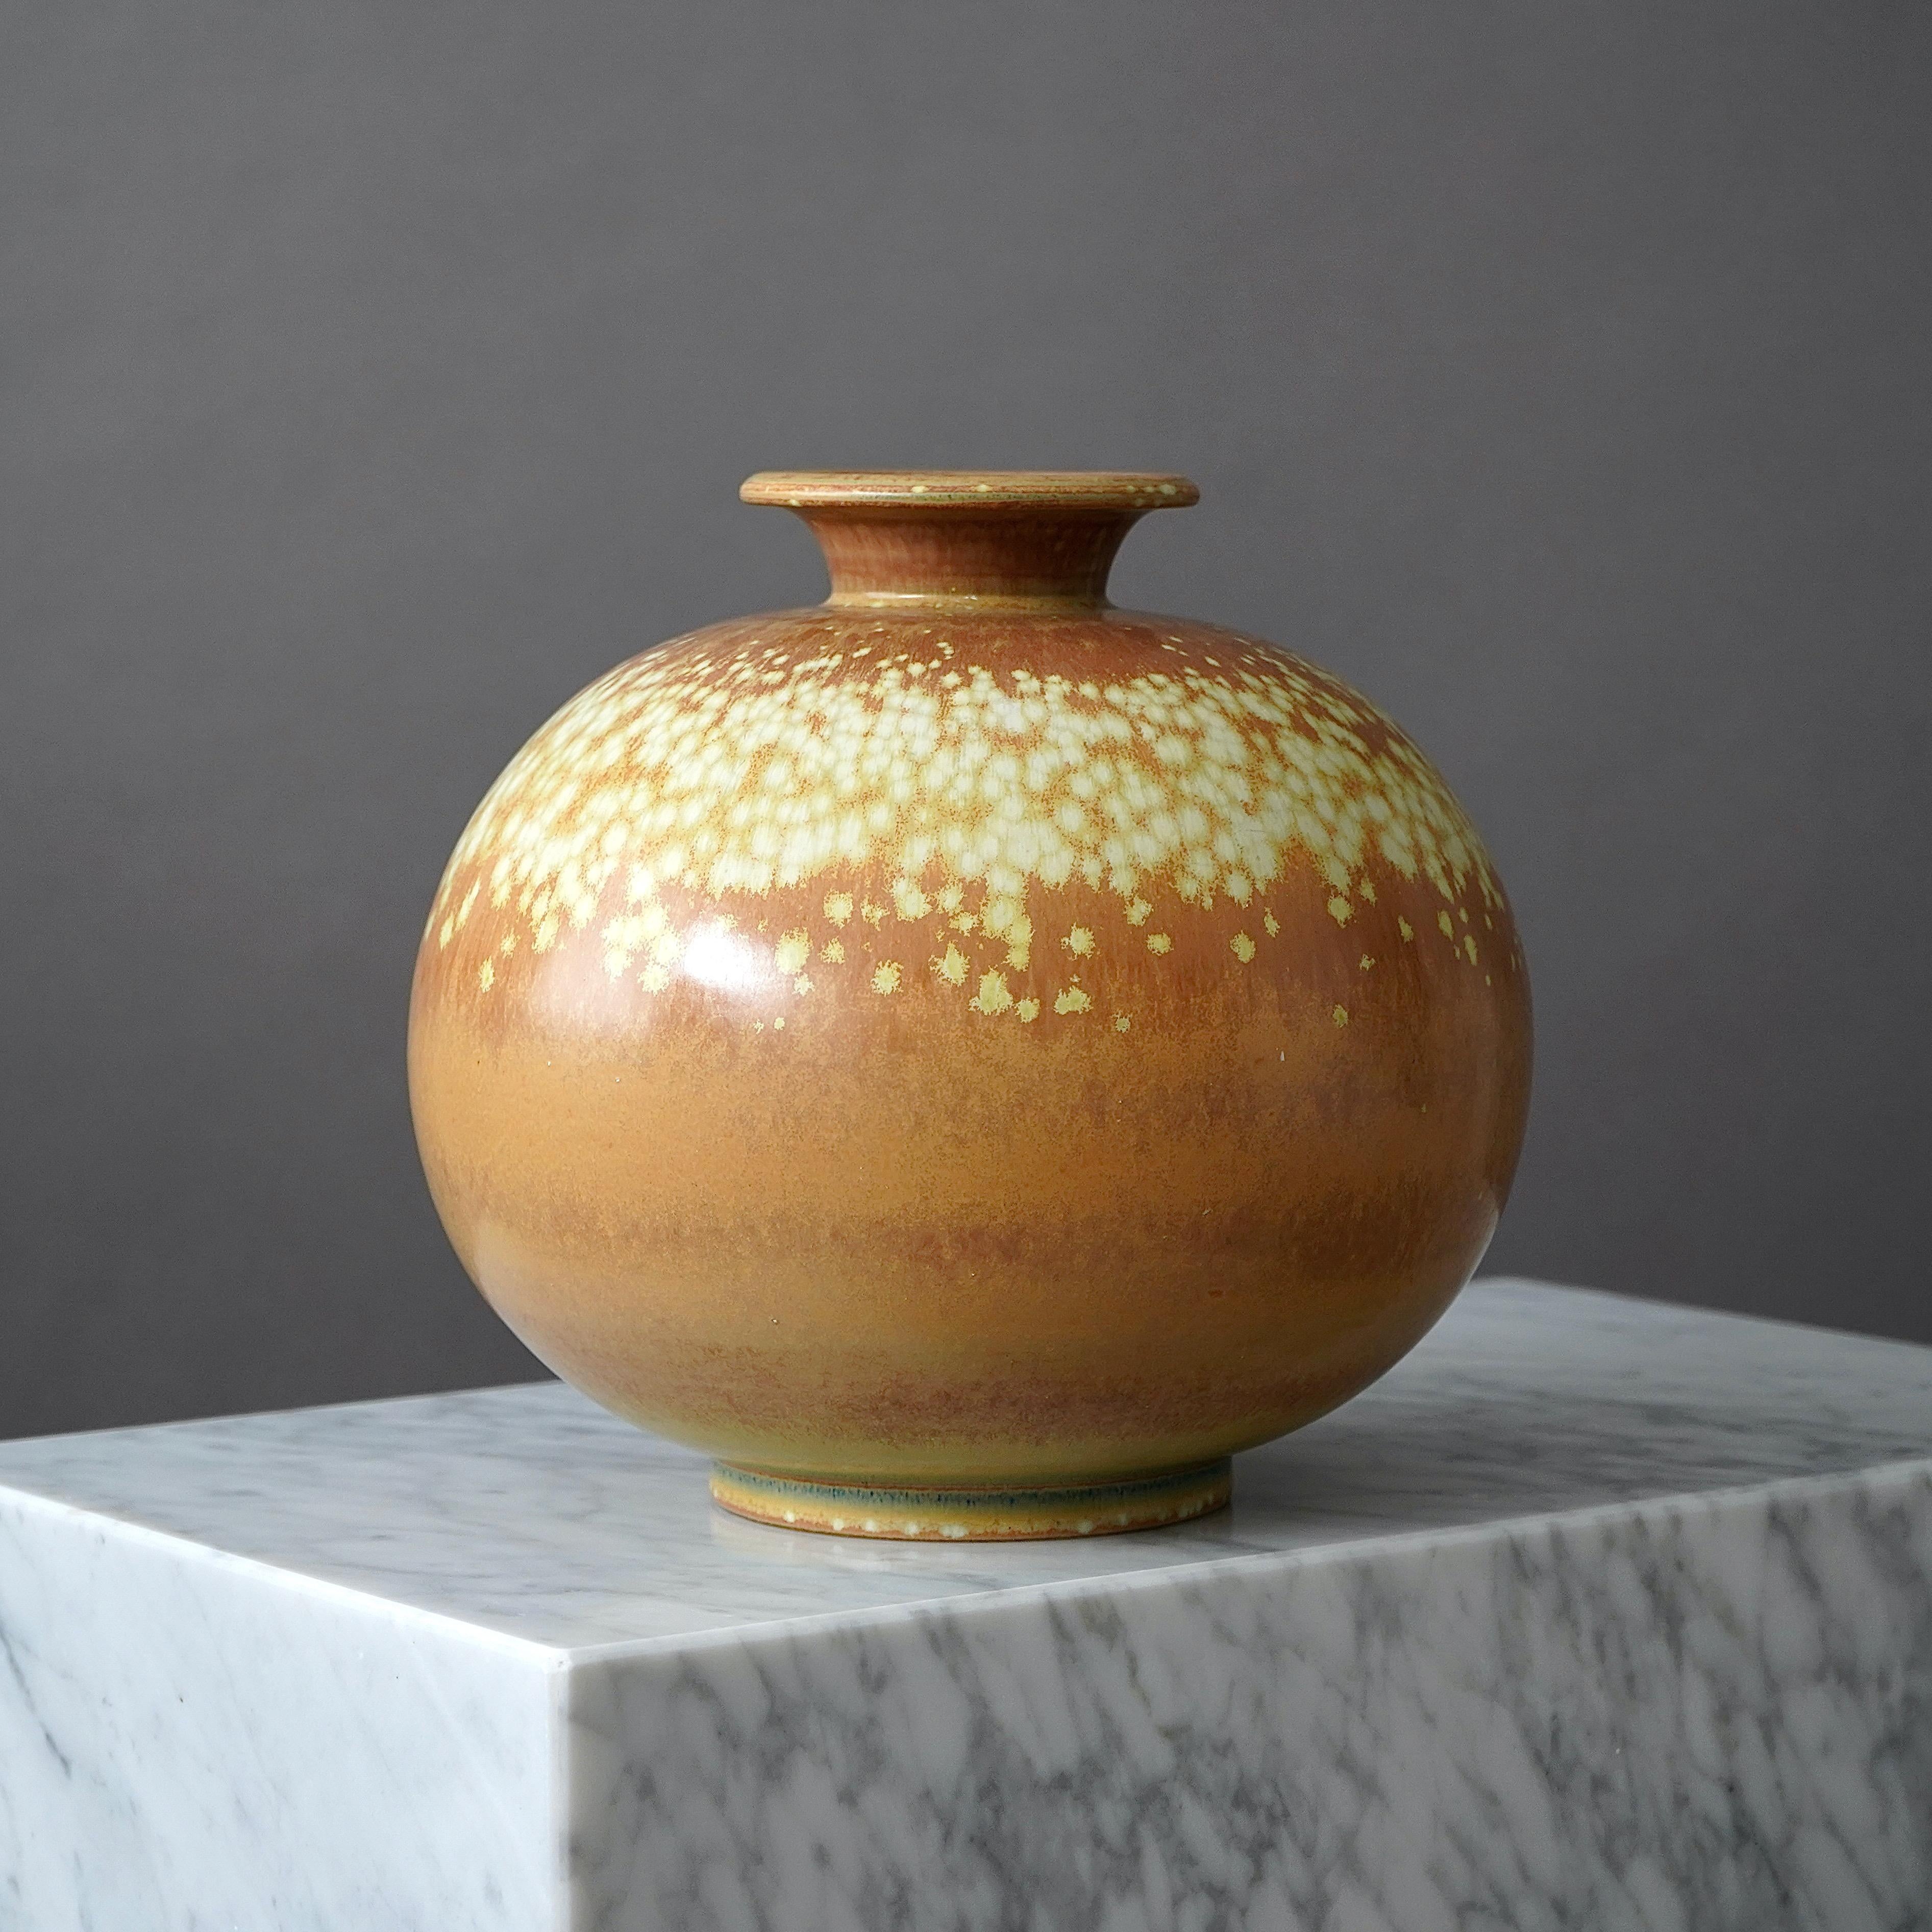 A large and unique stoneware vase with amazing glaze. 
Designed by Gunnar Nylund for Rorstrand, Sweden, 1940s.  

Excellent condition. Incised signature 